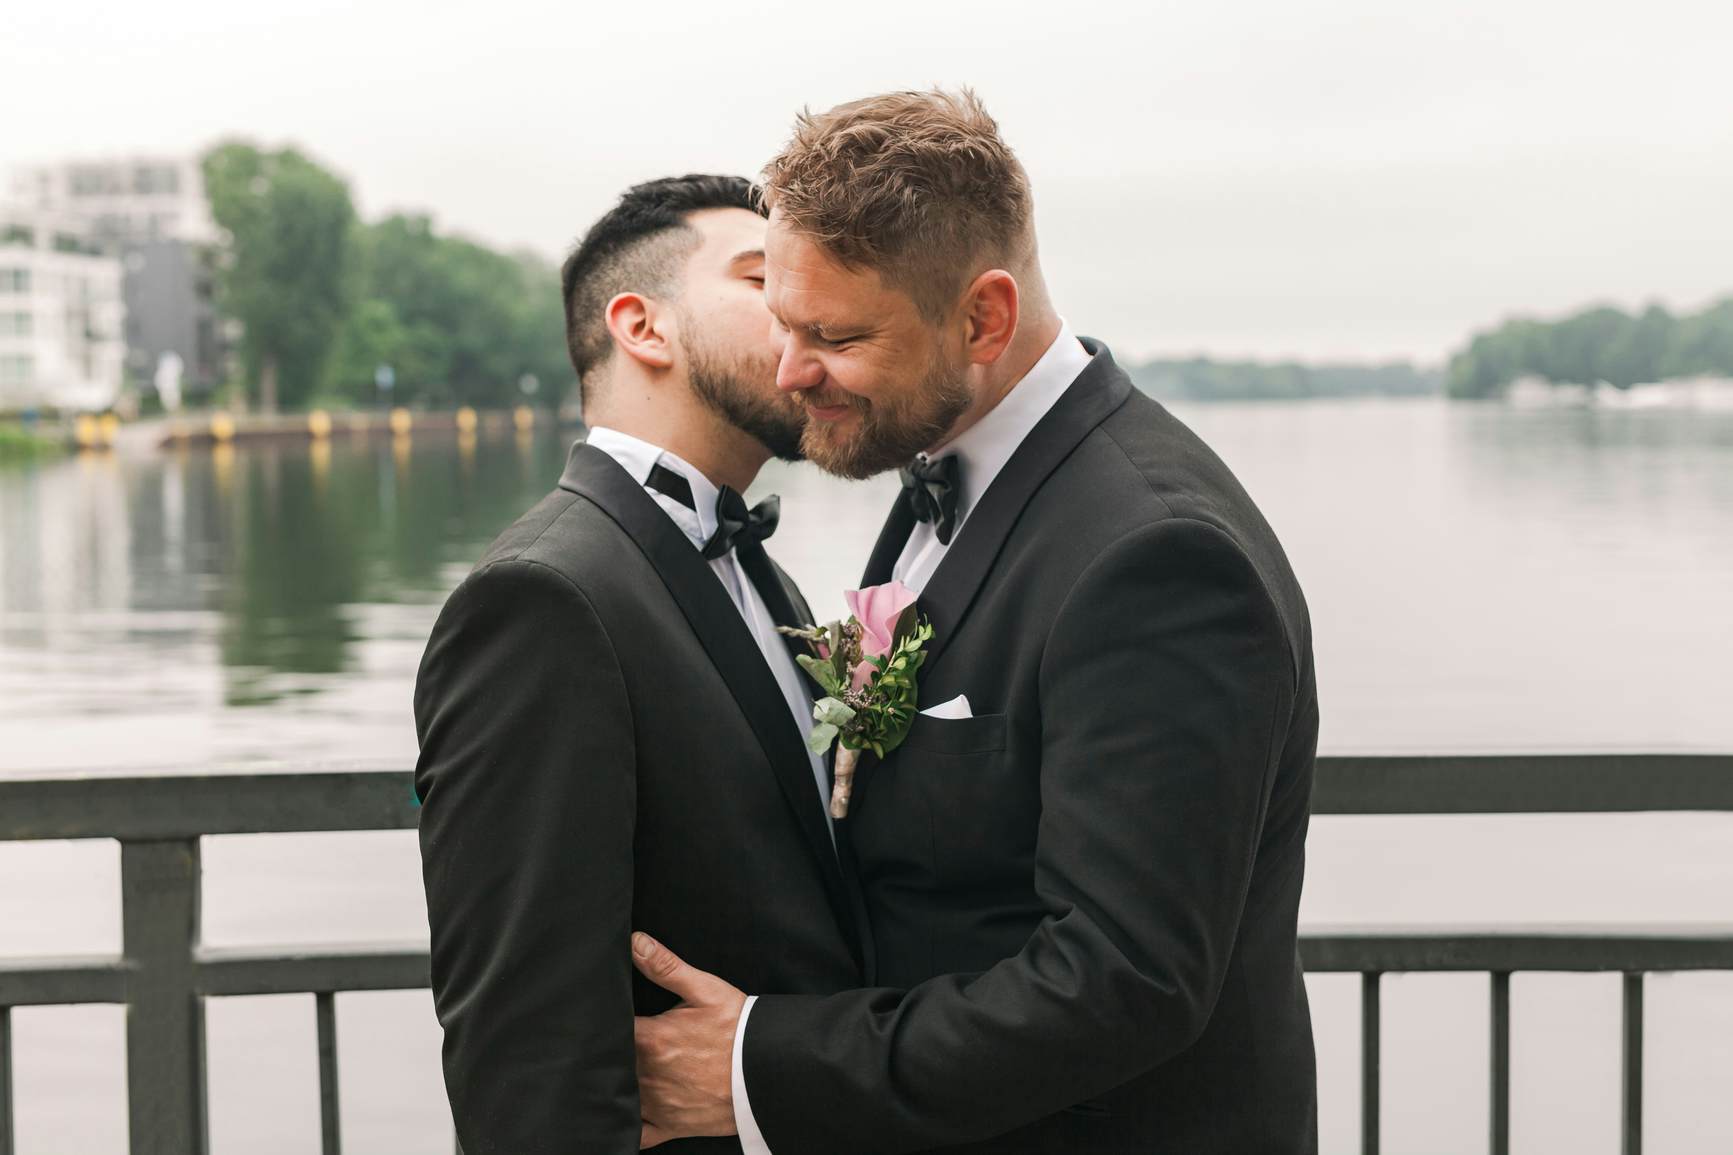 Planning a same sex marriage in Switzerland - all you need to know image image